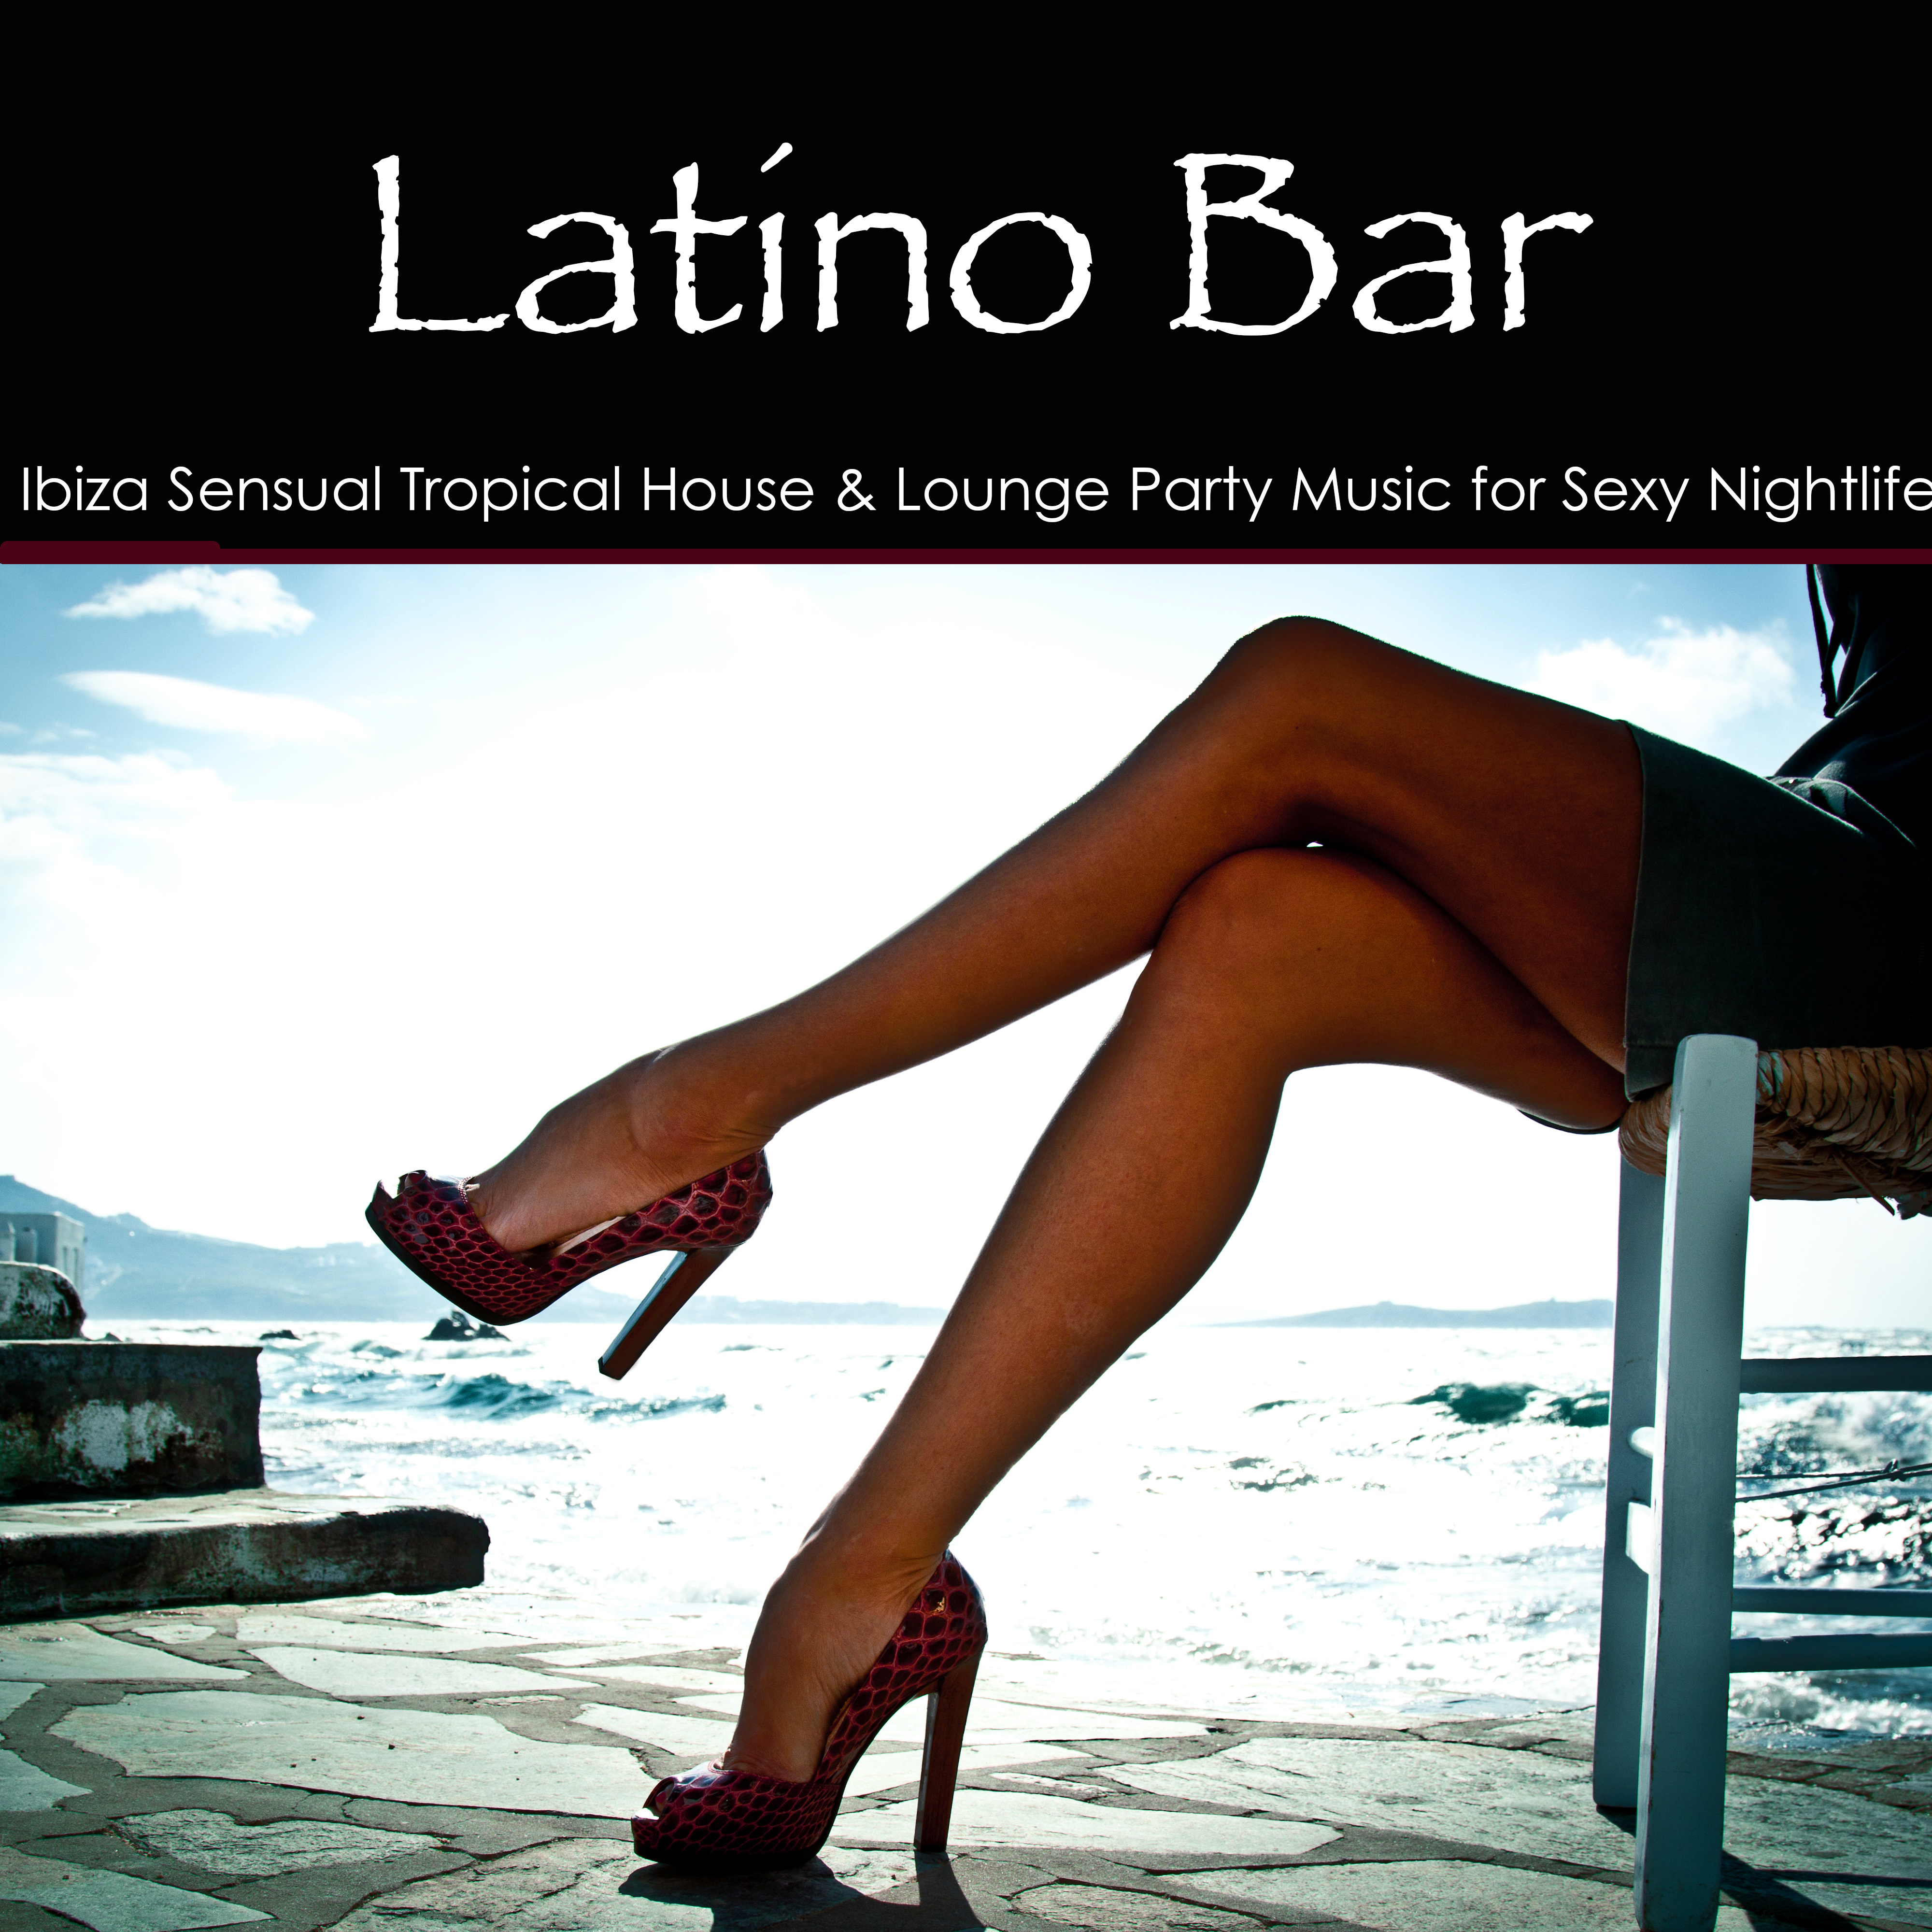 Latino Bar – Ibiza Sensual Tropical House & Lounge Party Music for Sexy Nightlife